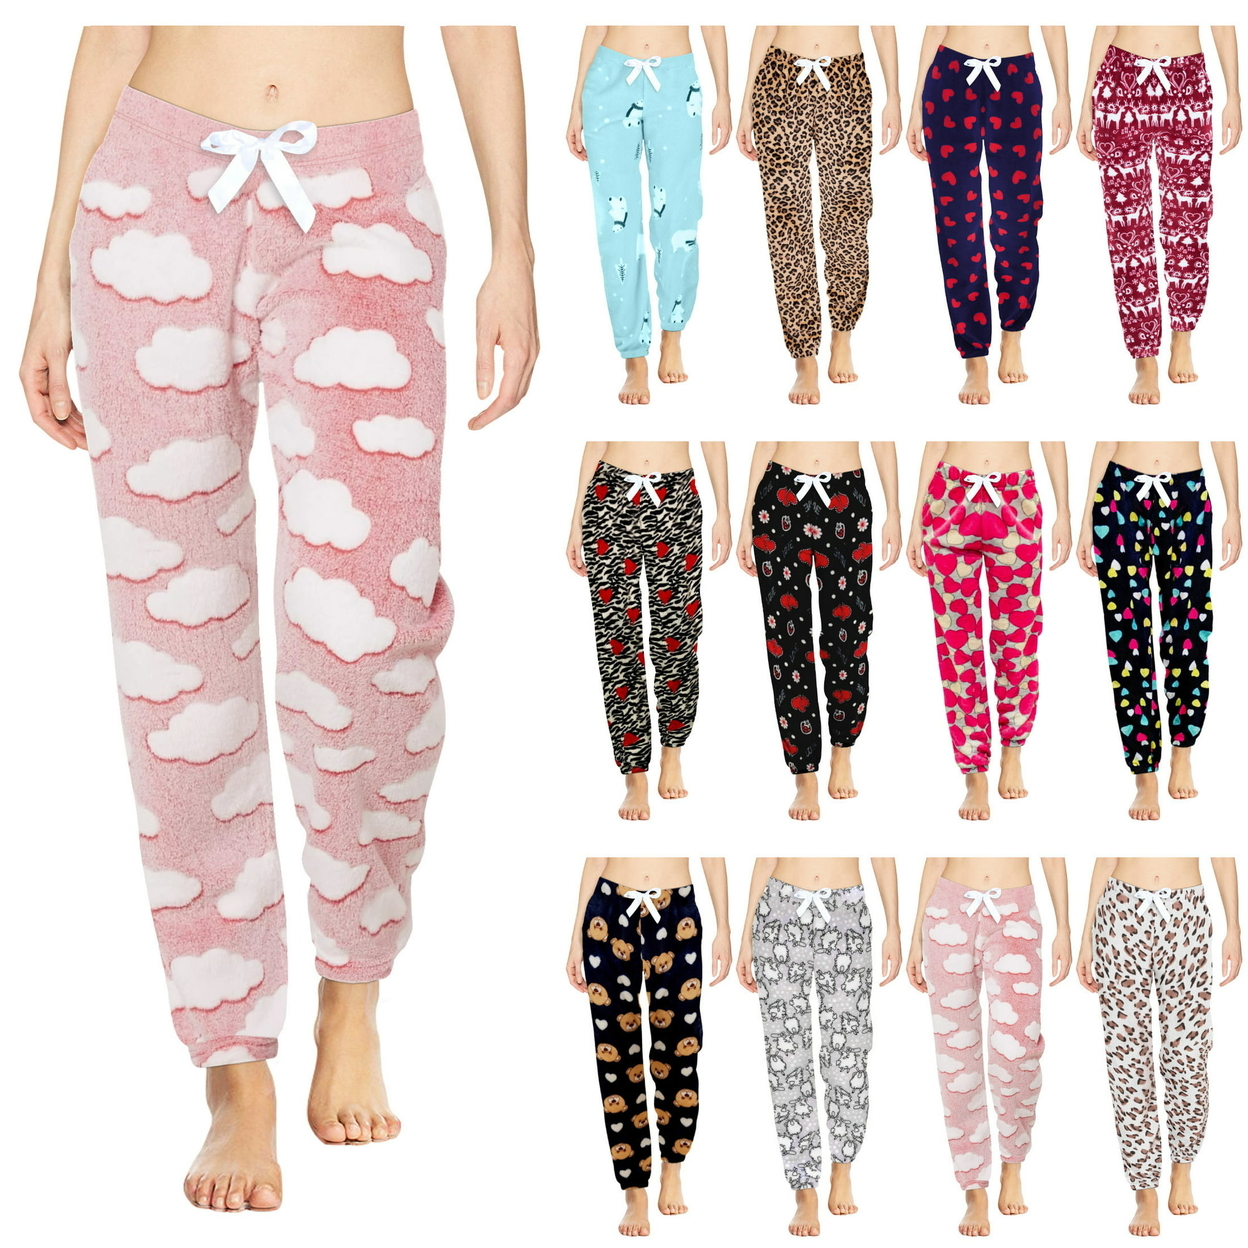 4-Pack: Women's Solid & Printed Ultra-Soft Comfy Stretch Micro-Fleece Pajama Lounge Pants - Medium, Solid